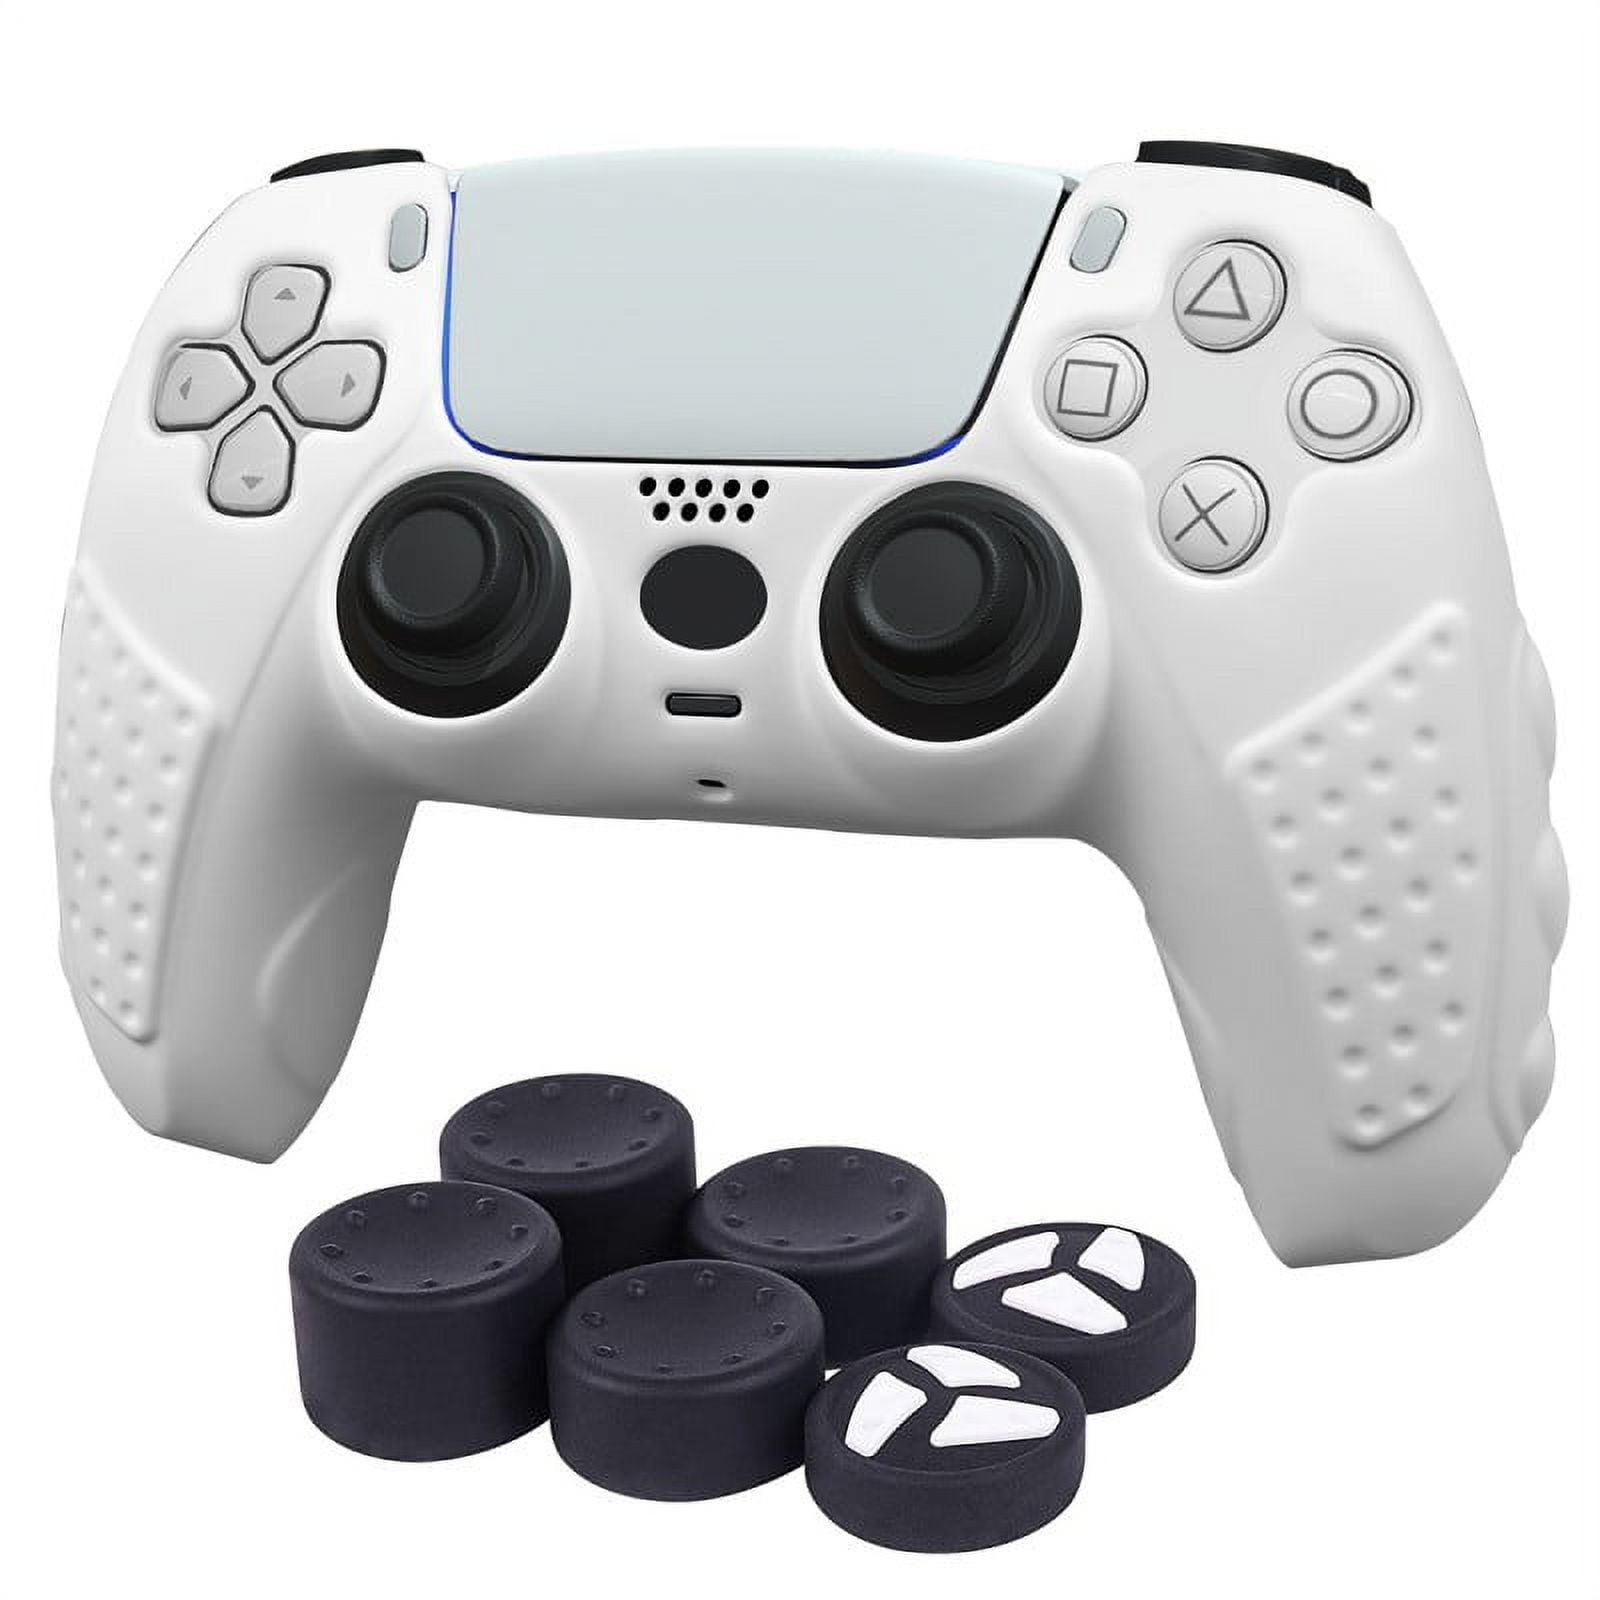 PS5 Controller Skin Anti-Slip Silicone Grip Cover Protector Rubber Case  Accessories Set for Playstation 5 Gamepad Joystick with 6 Thumb Grip Caps